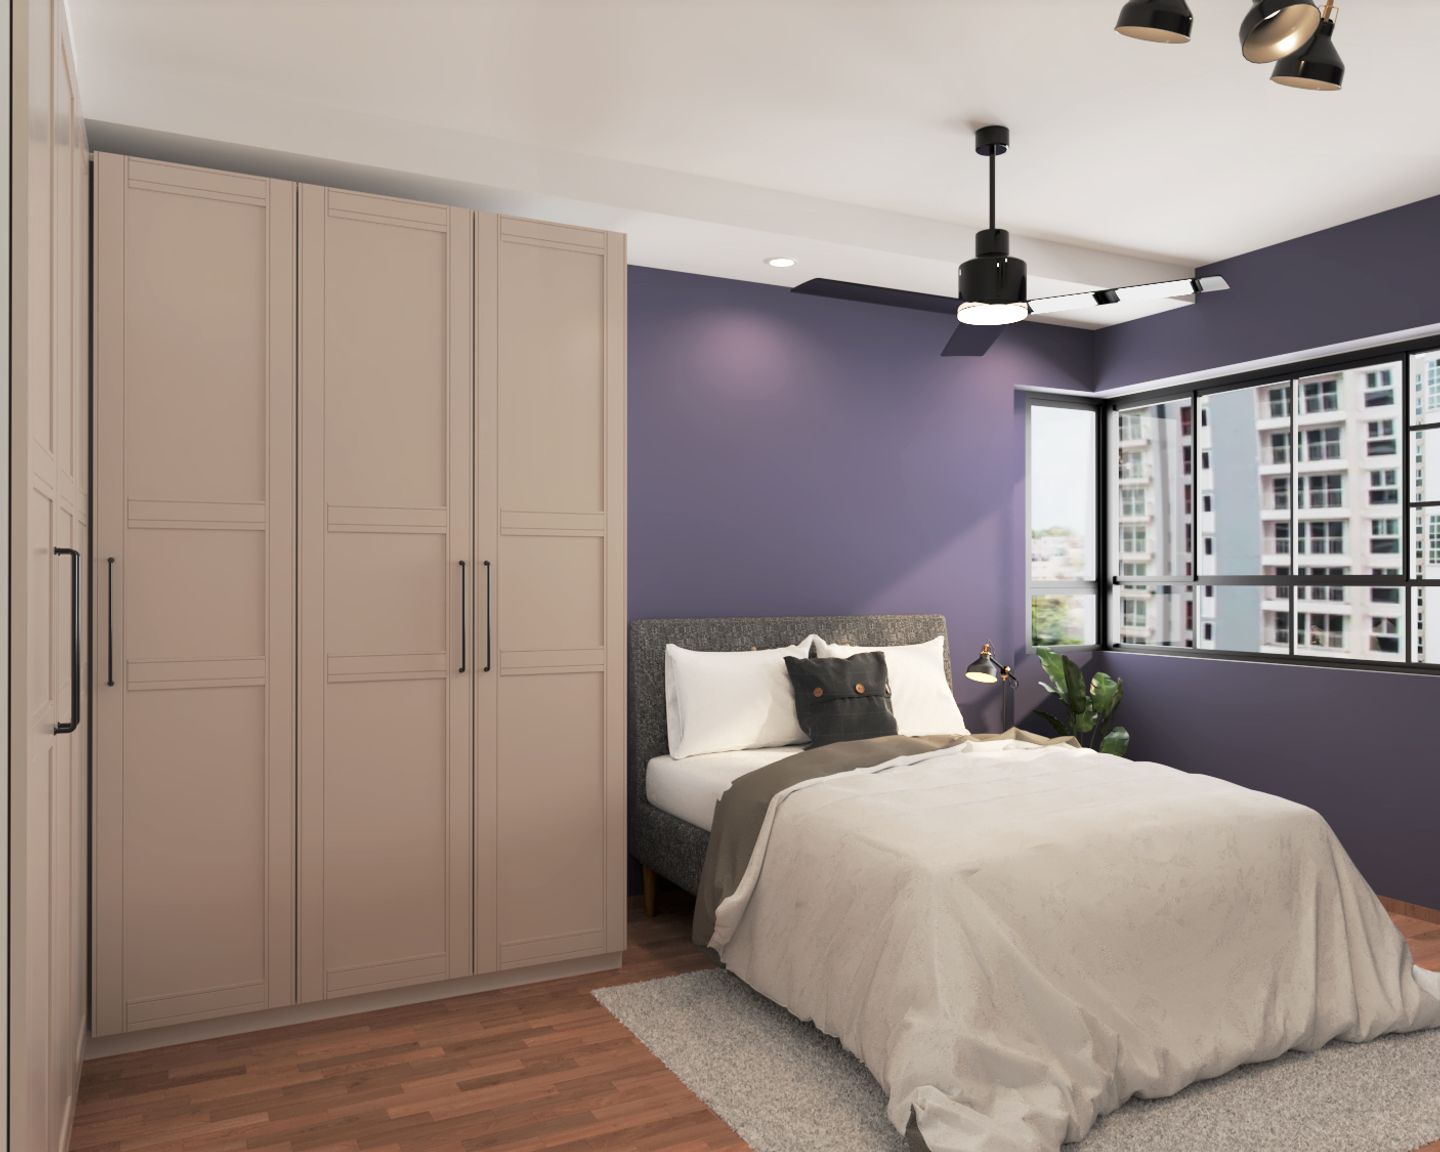 Modern Purple Wall Paint Design For Bedrooms - Livspace